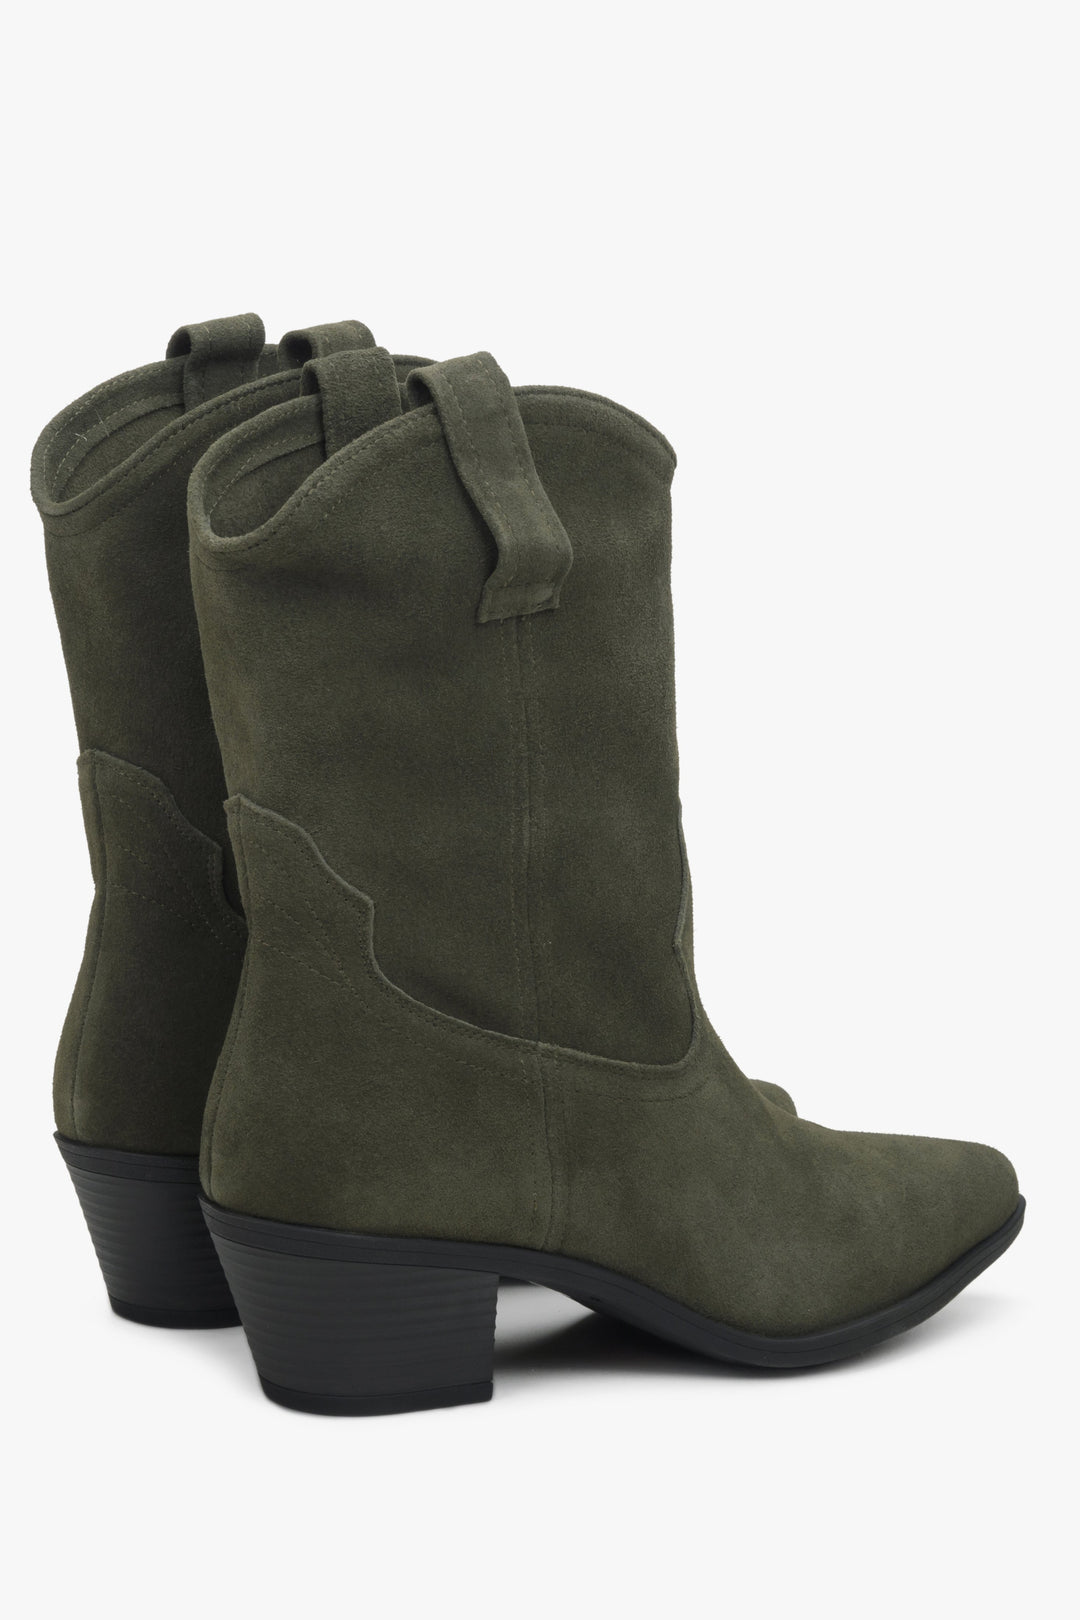 Women's dsrk green Cowboy boots - presentation of a shoe toe and sideline.